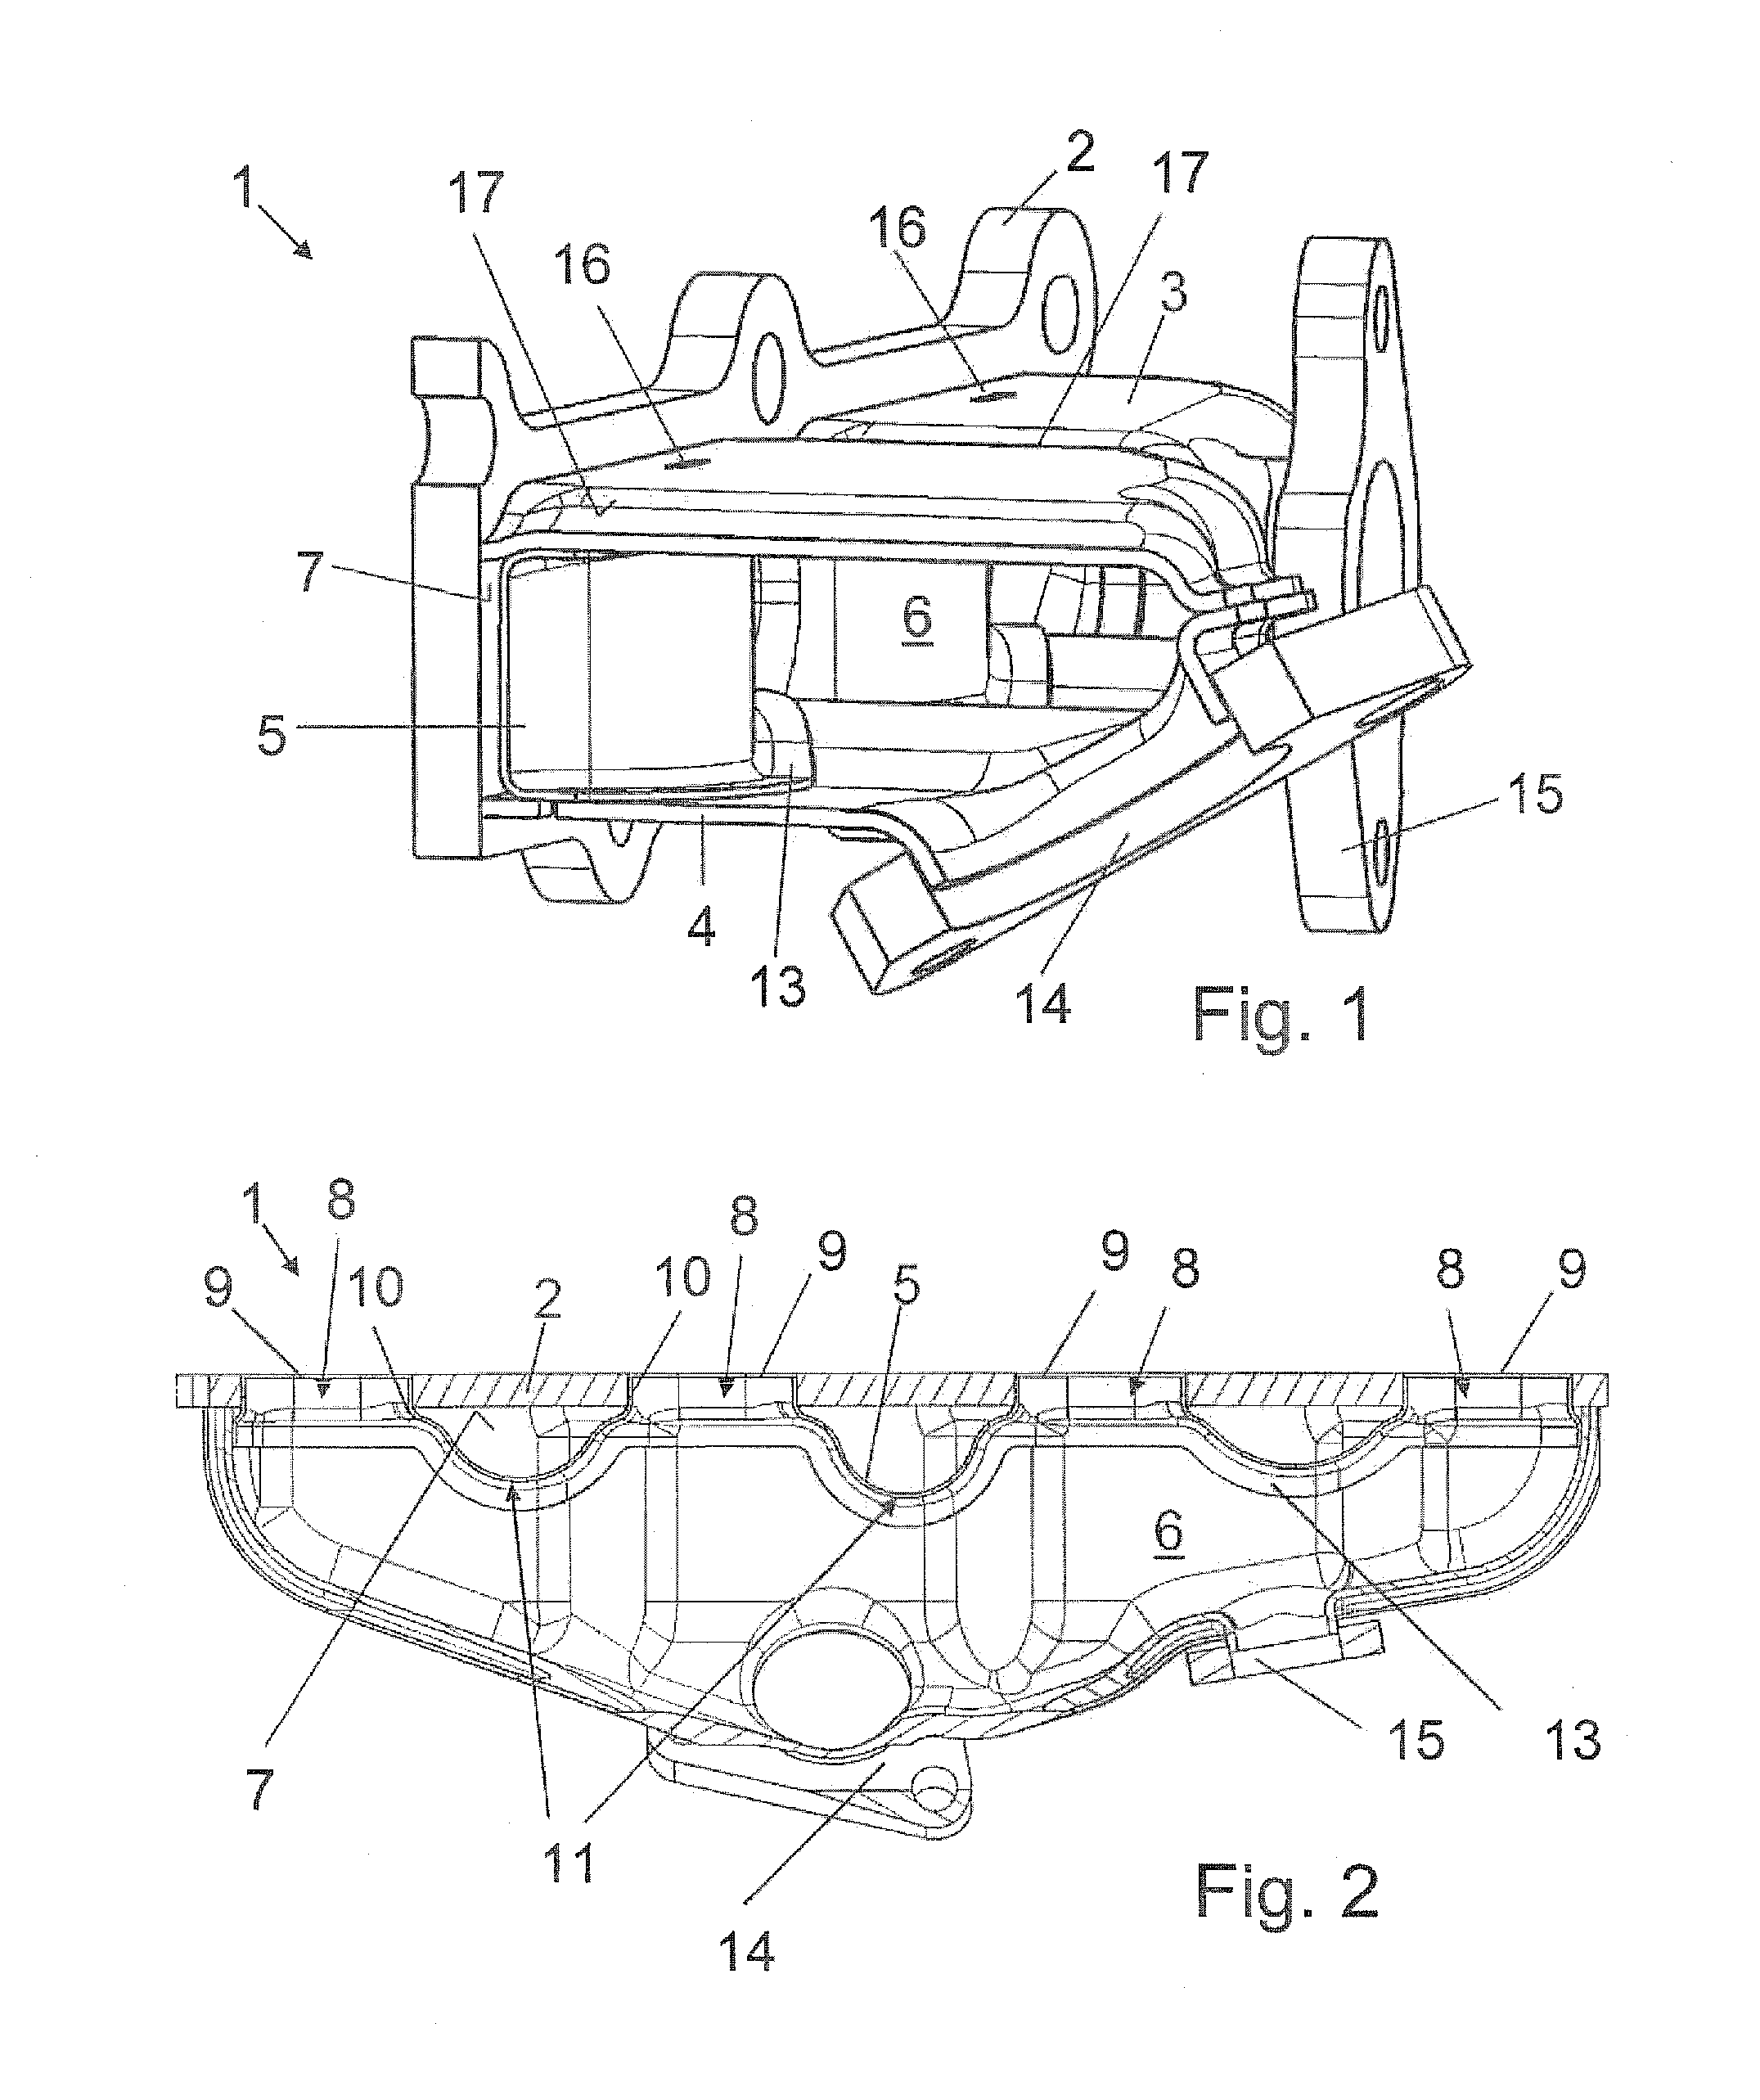 Exhaust manifold with baffle plate